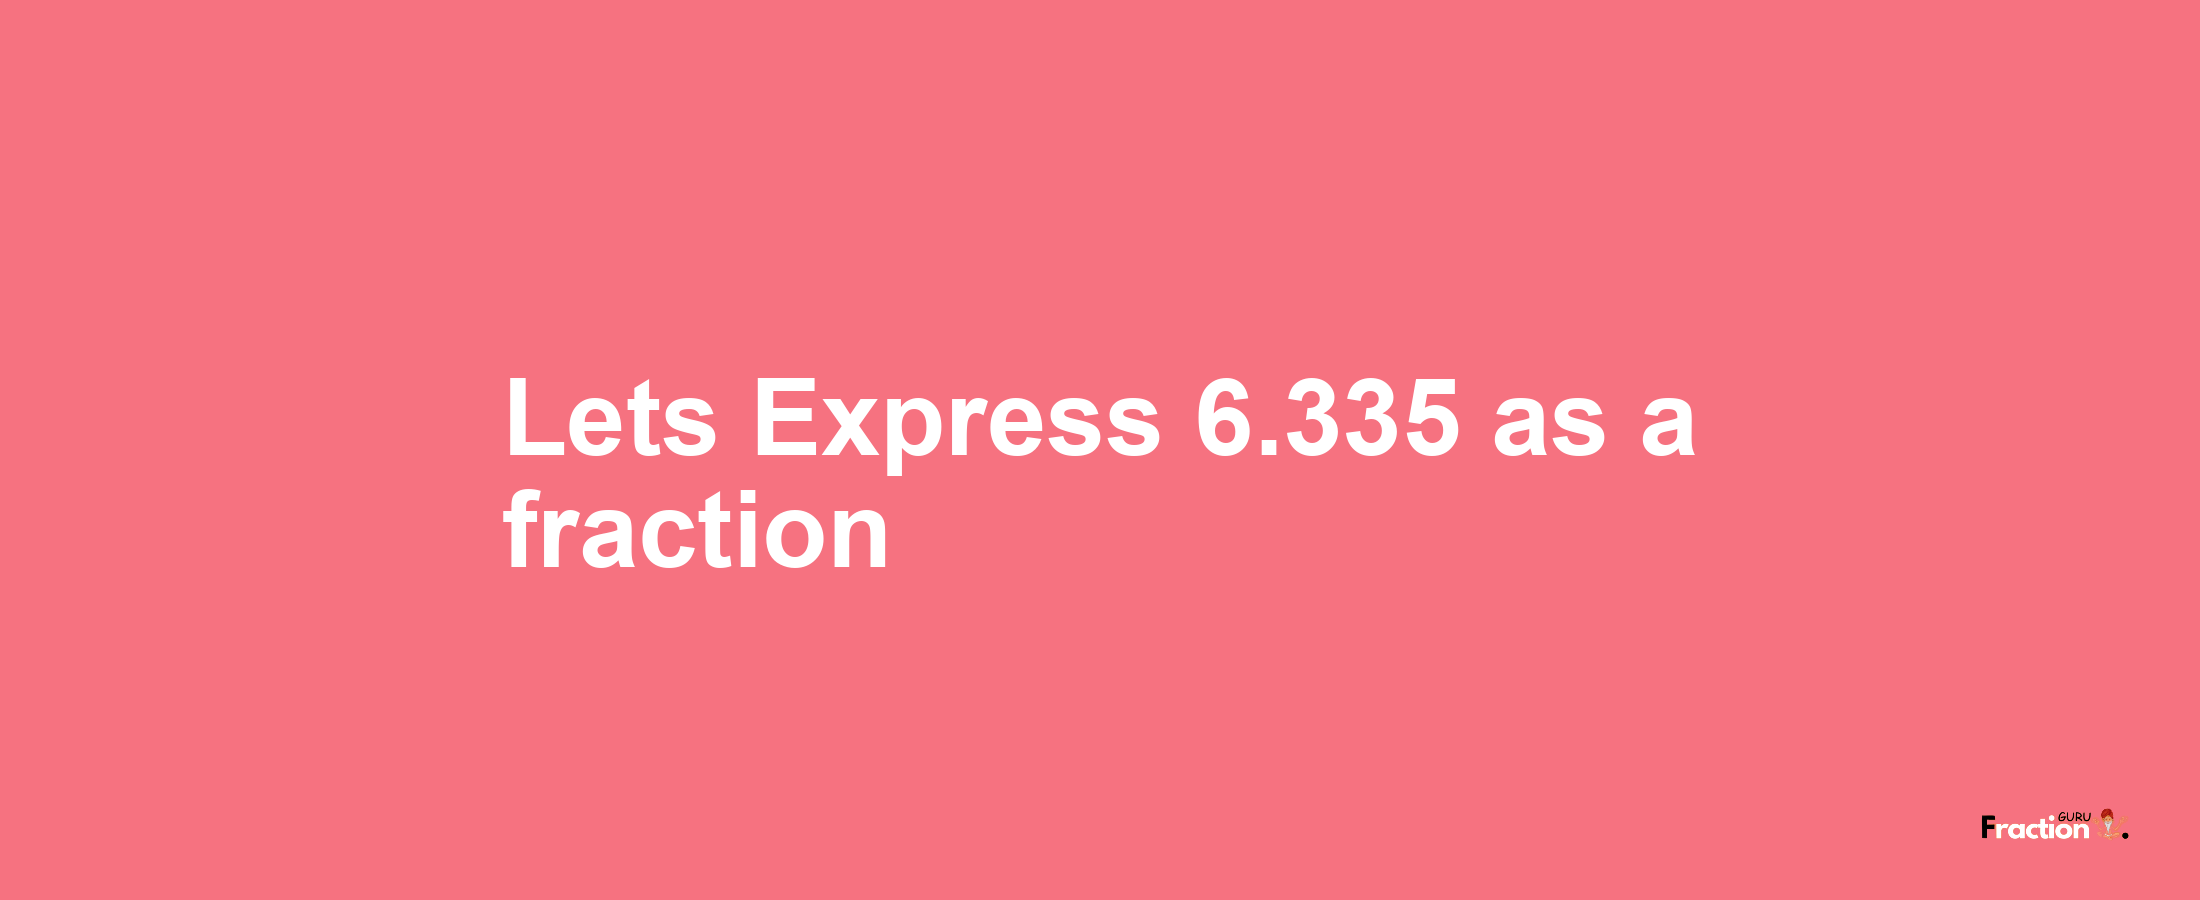 Lets Express 6.335 as afraction